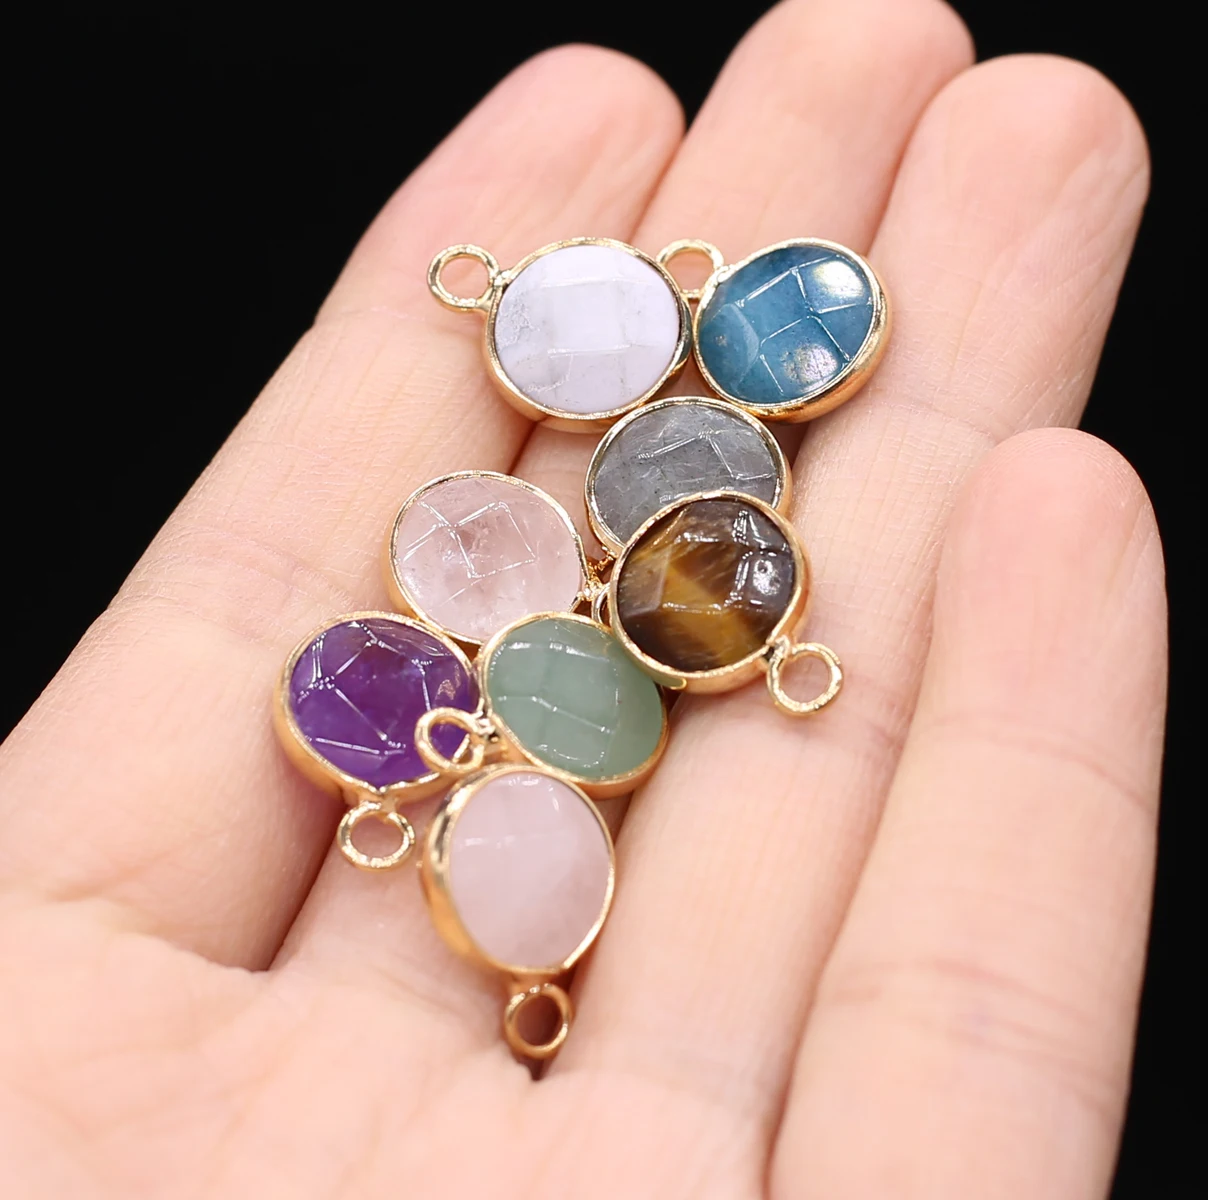 

5pcs/lot Natural Stone Faceted Pendant Round Shape Natural Flash Labradorites Amethysts Pendant for Making DIY Jewerly Necklace